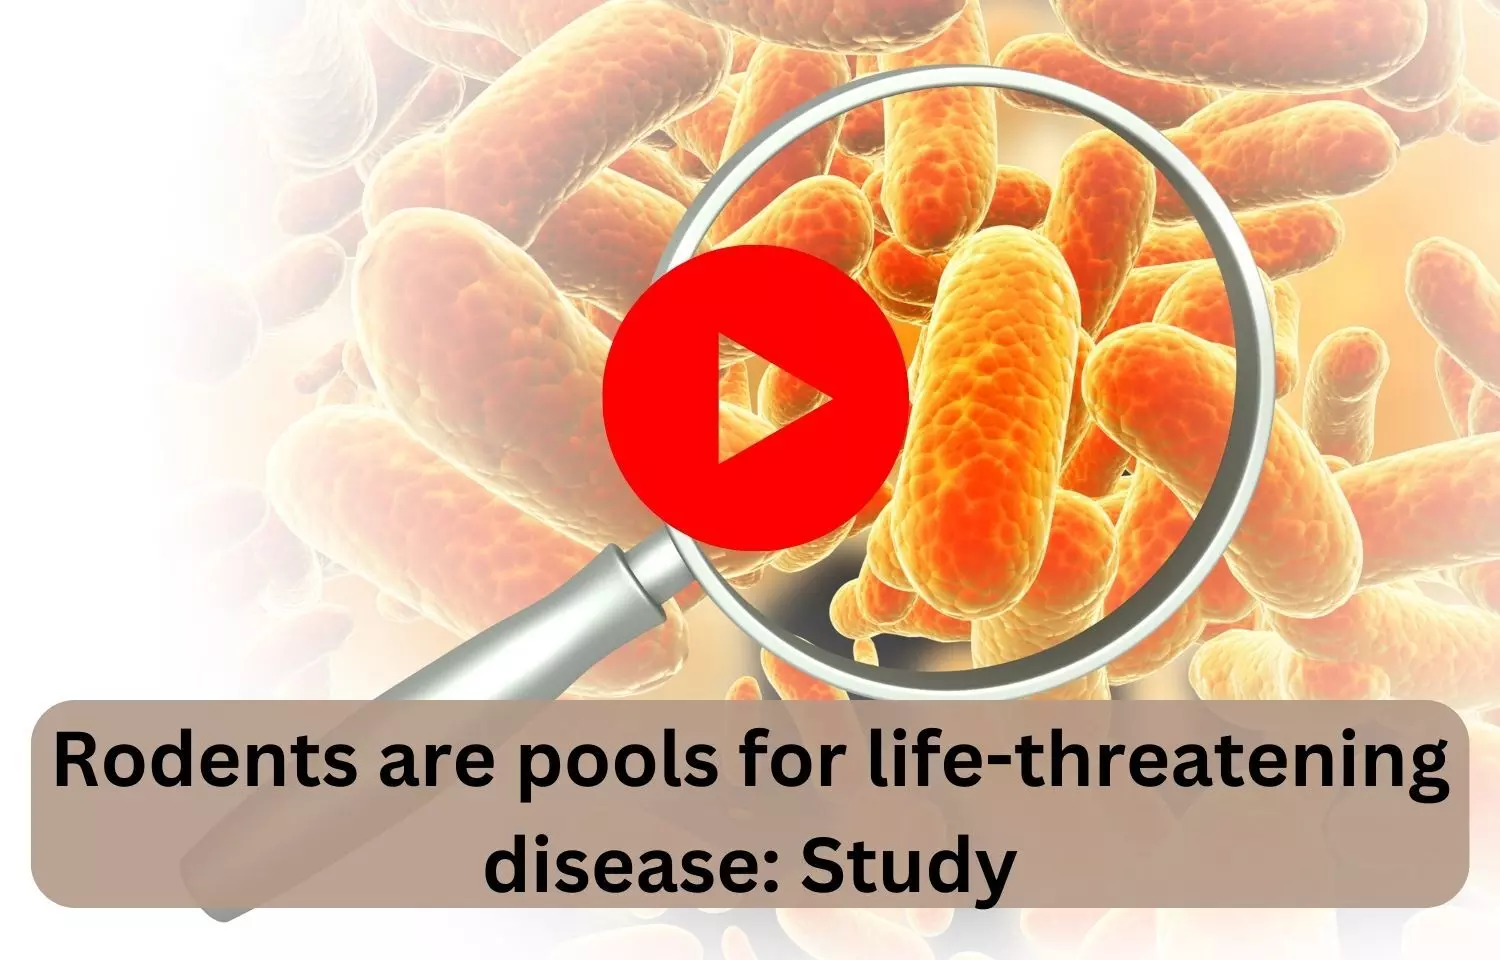 Rodents are pools for life-threatening disease: Study